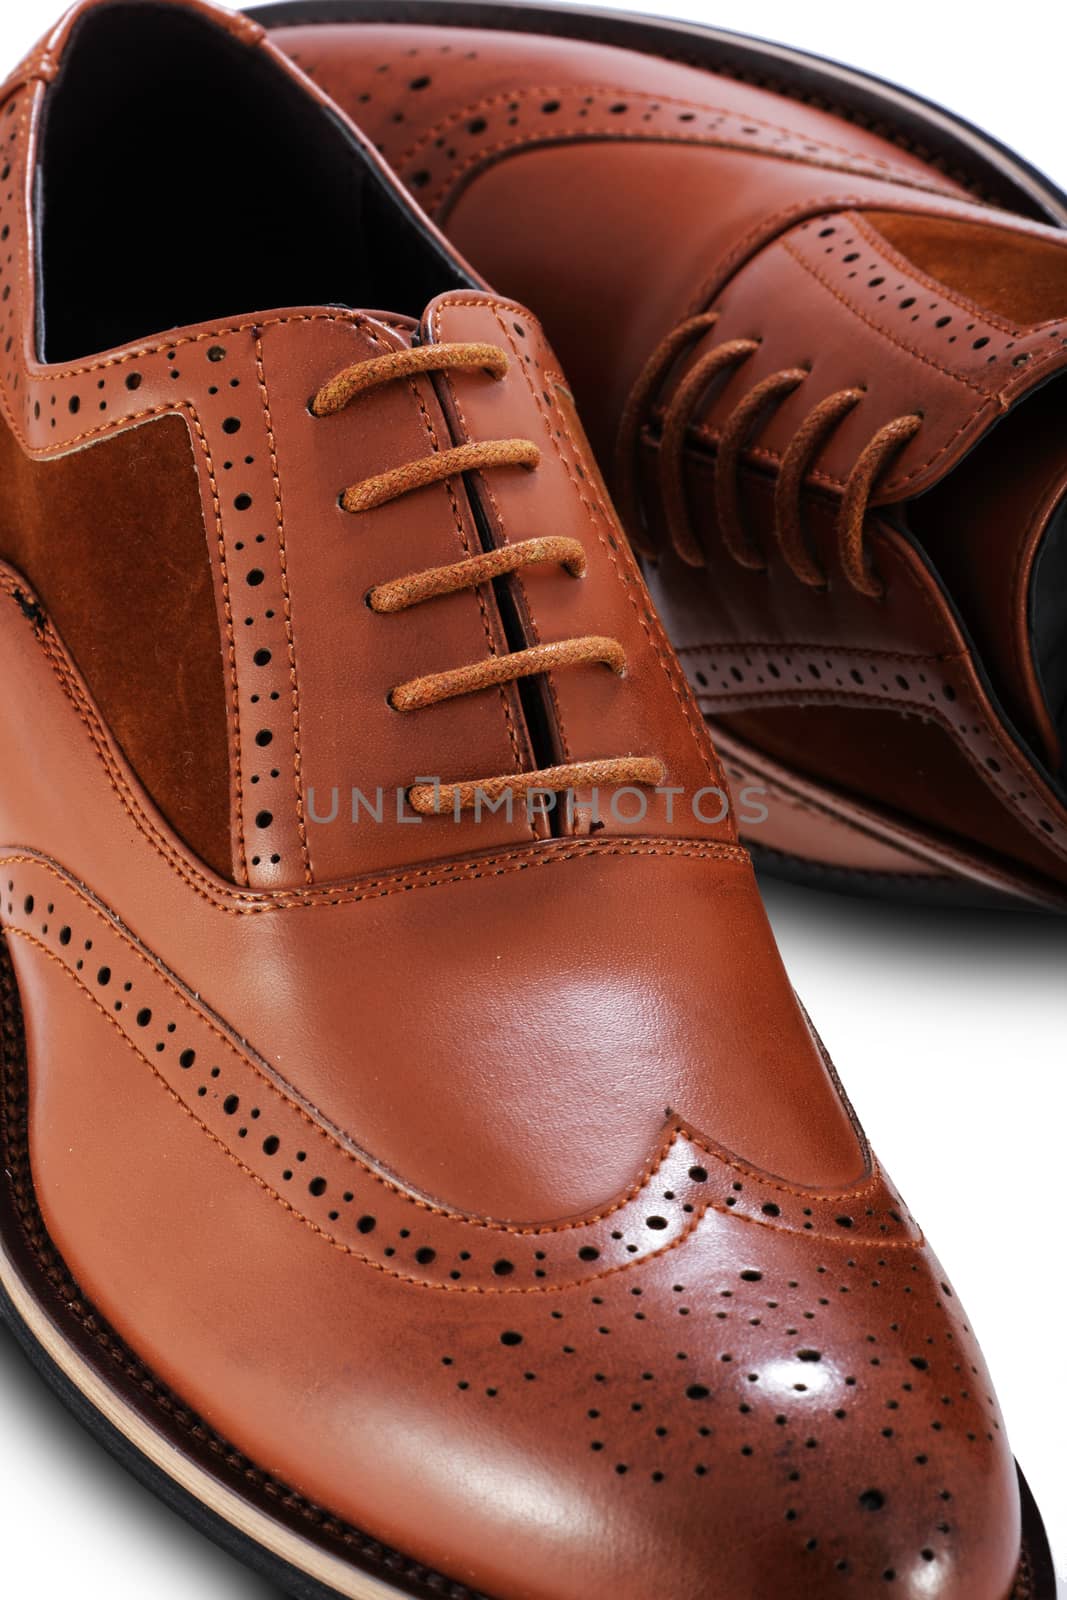 Men's brown brogue leather shoes on a white background